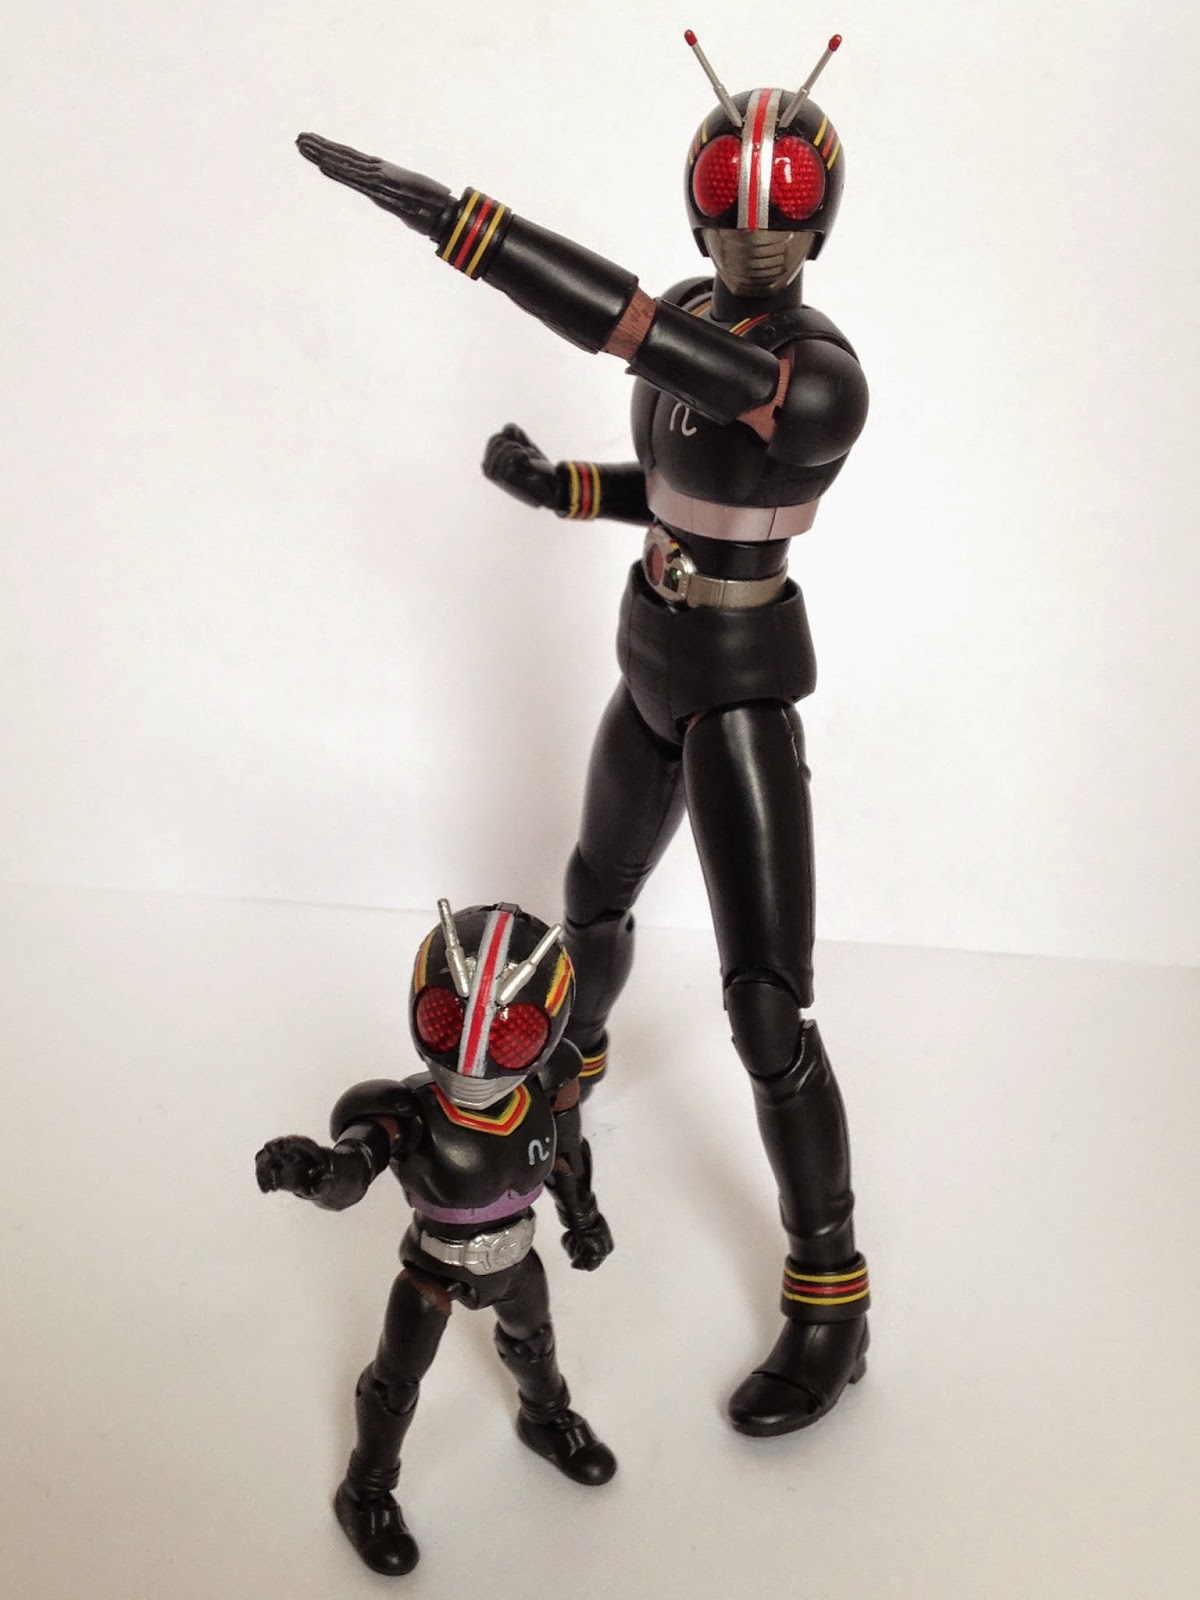 With Figuarts Black